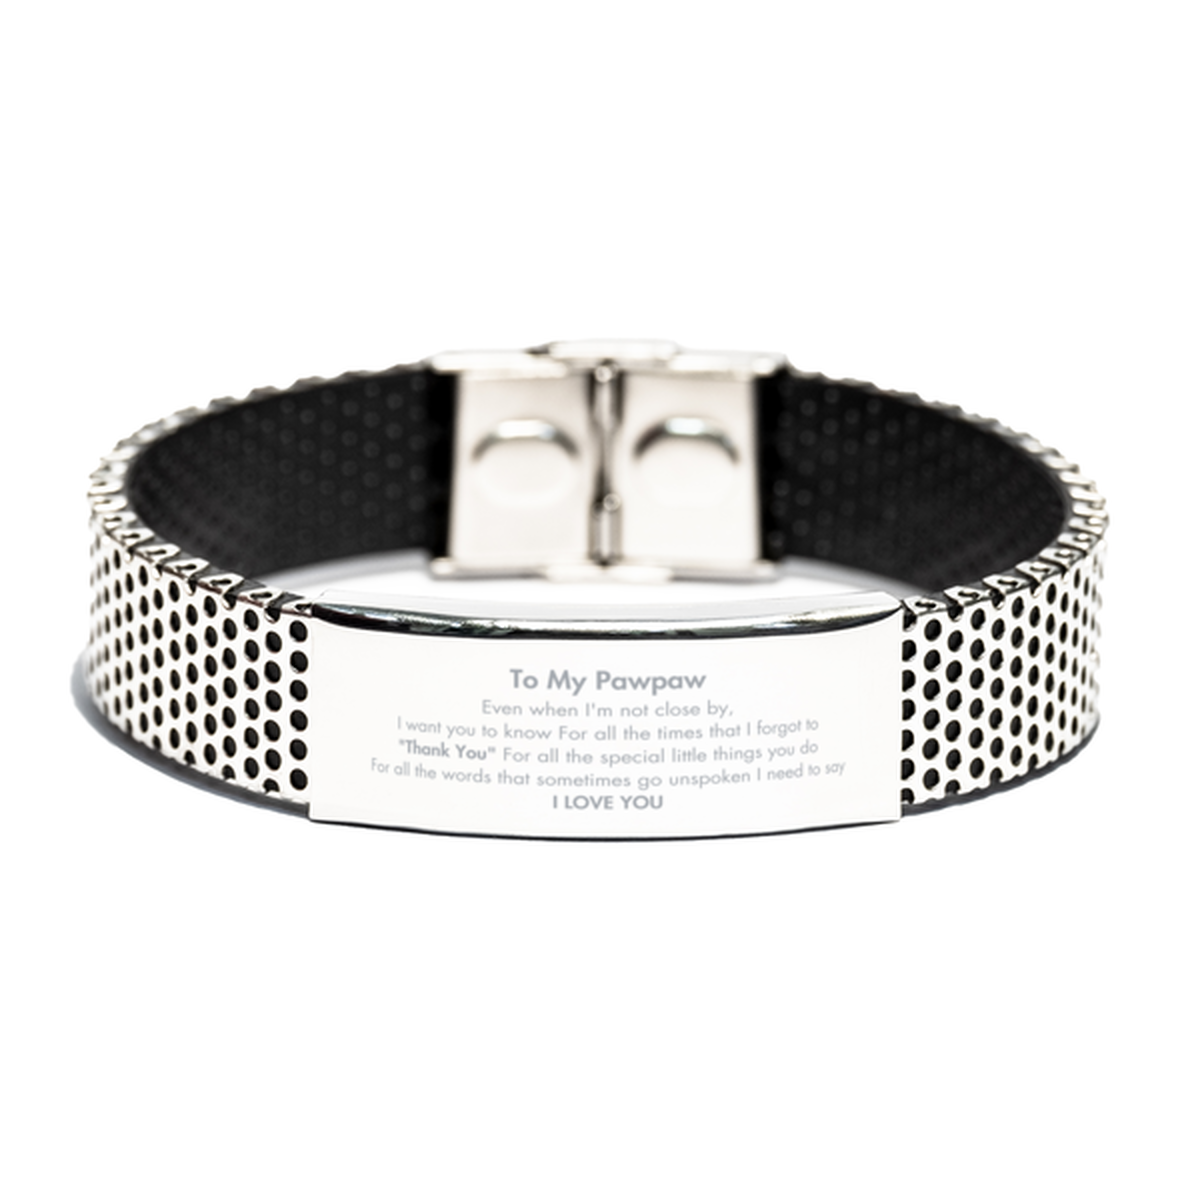 Thank You Gifts for Pawpaw, Keepsake Stainless Steel Bracelet Gifts for Pawpaw Birthday Mother's day Father's Day Pawpaw For all the words That sometimes go unspoken I need to say I LOVE YOU